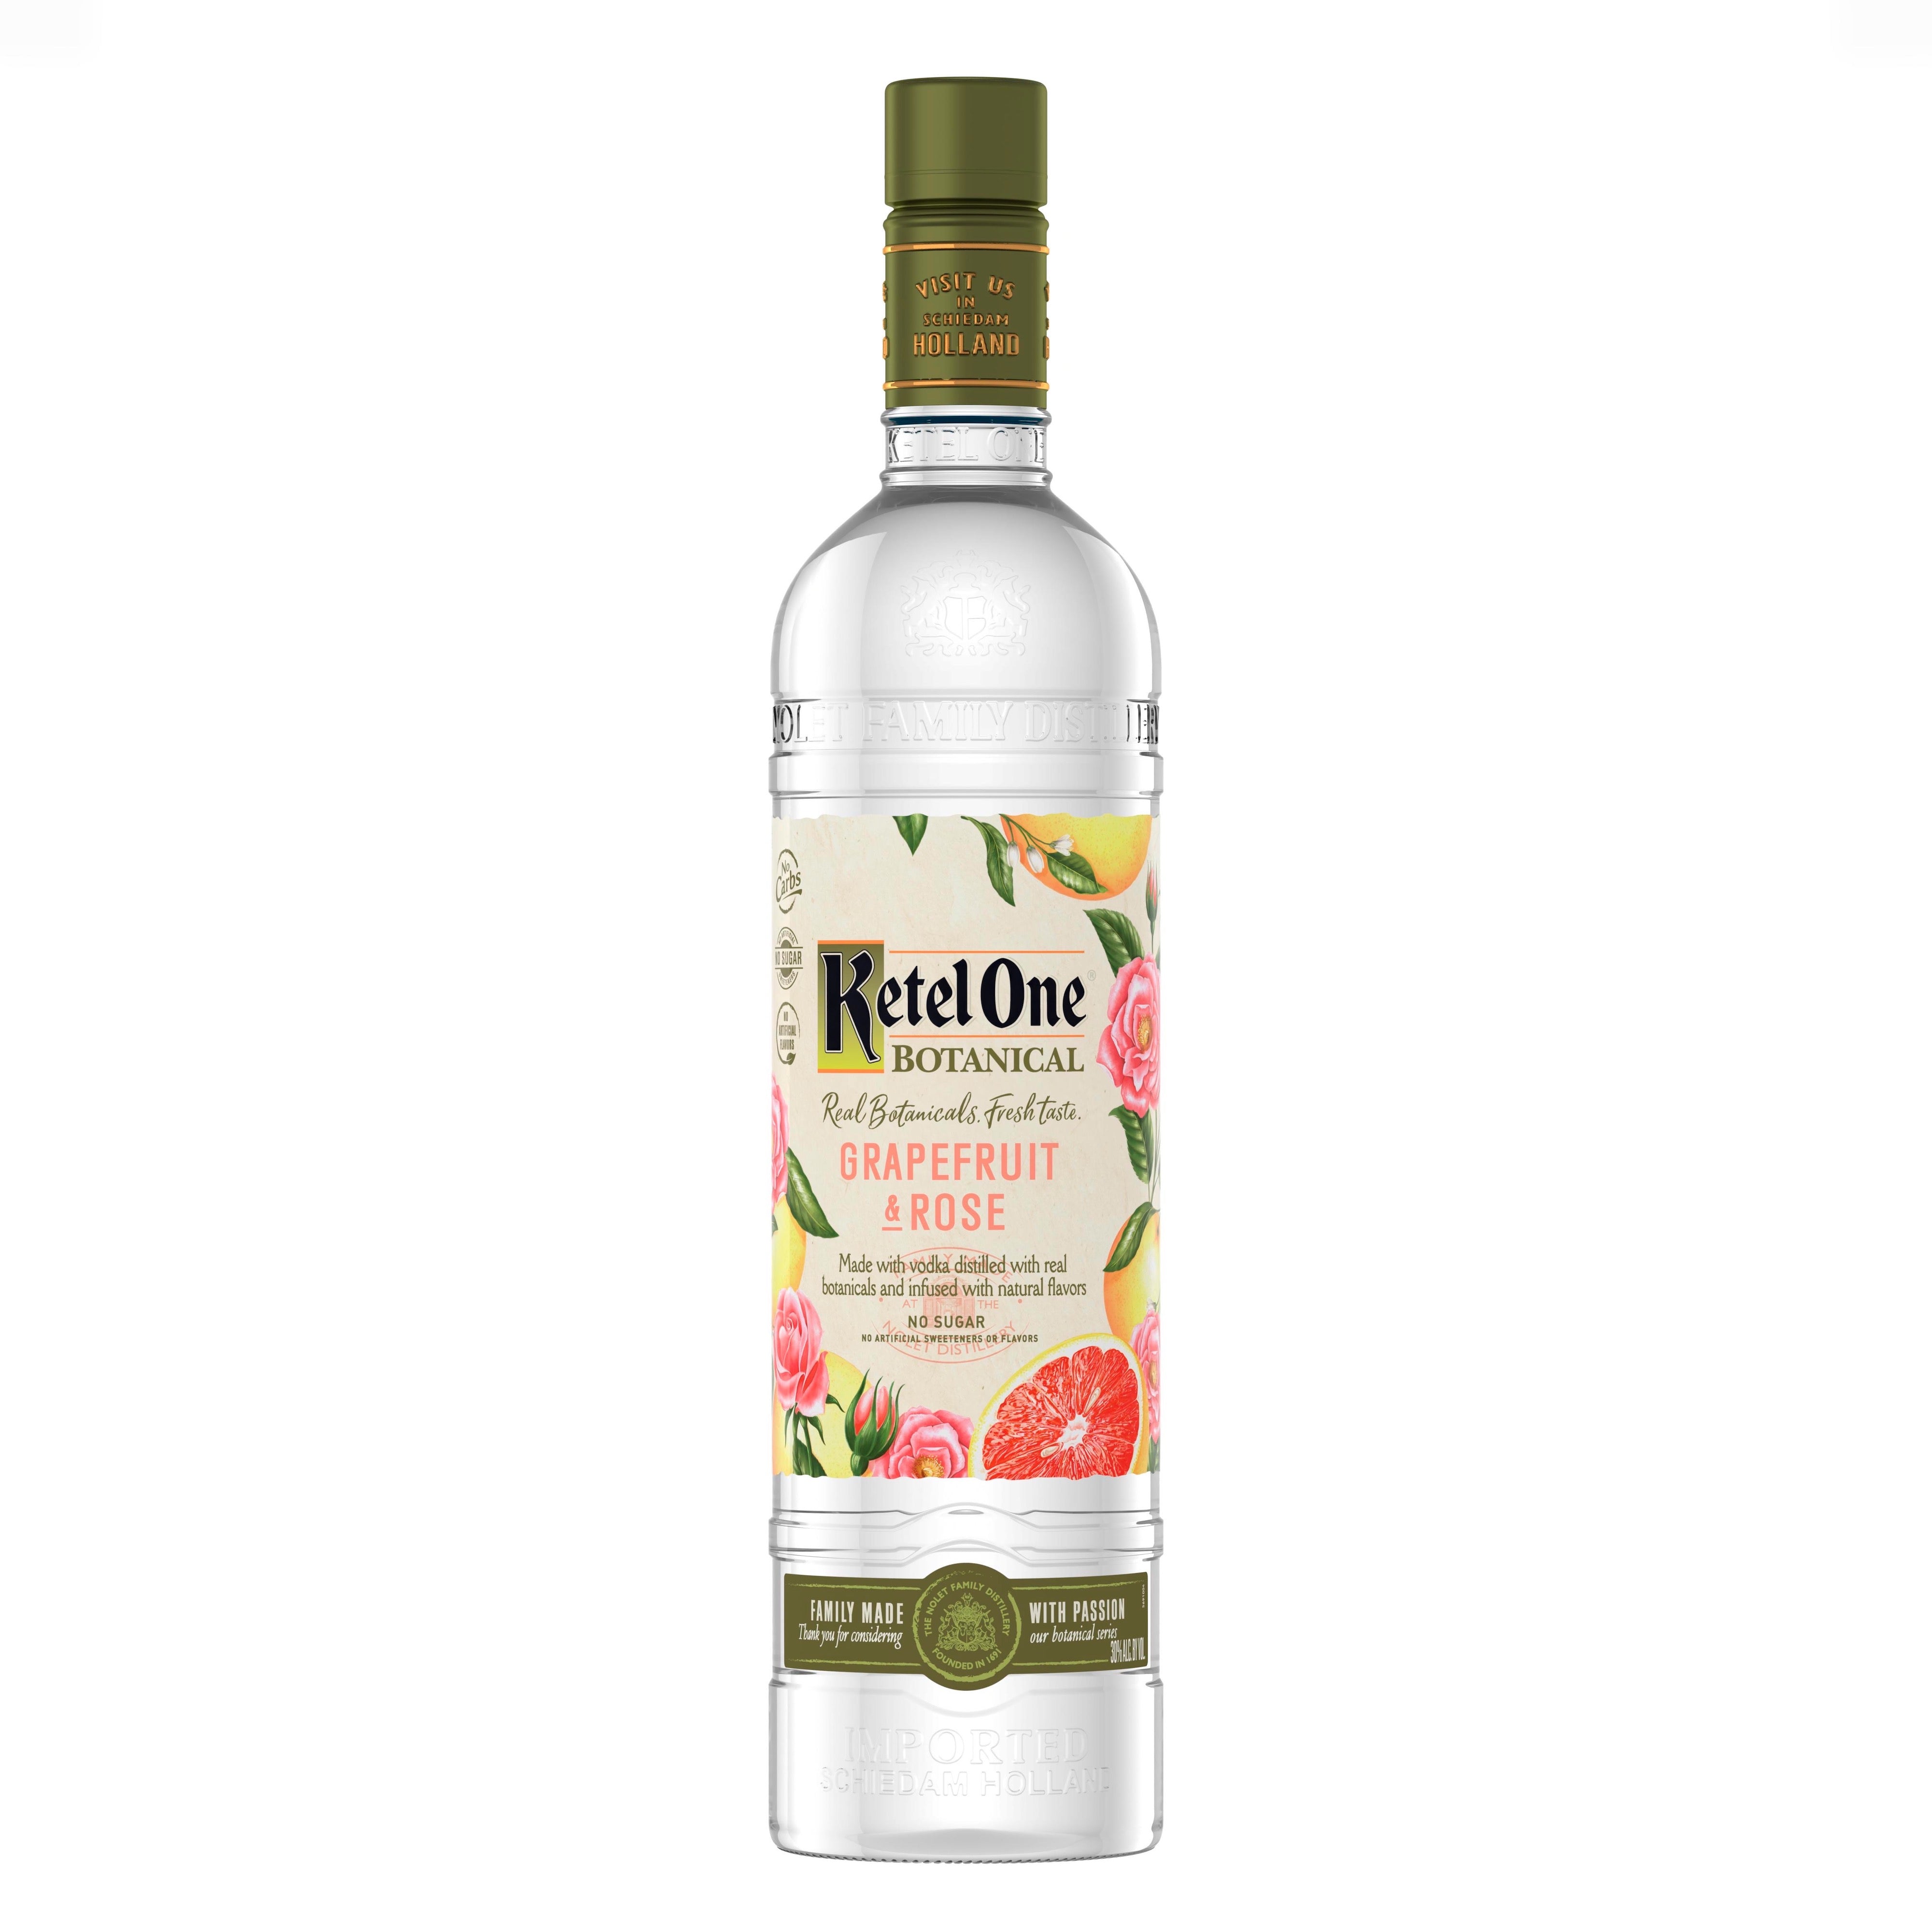 Ketel One Botanical Grapefruit & Rose 750mL a tall slender clear glass bottle with a white label and green top